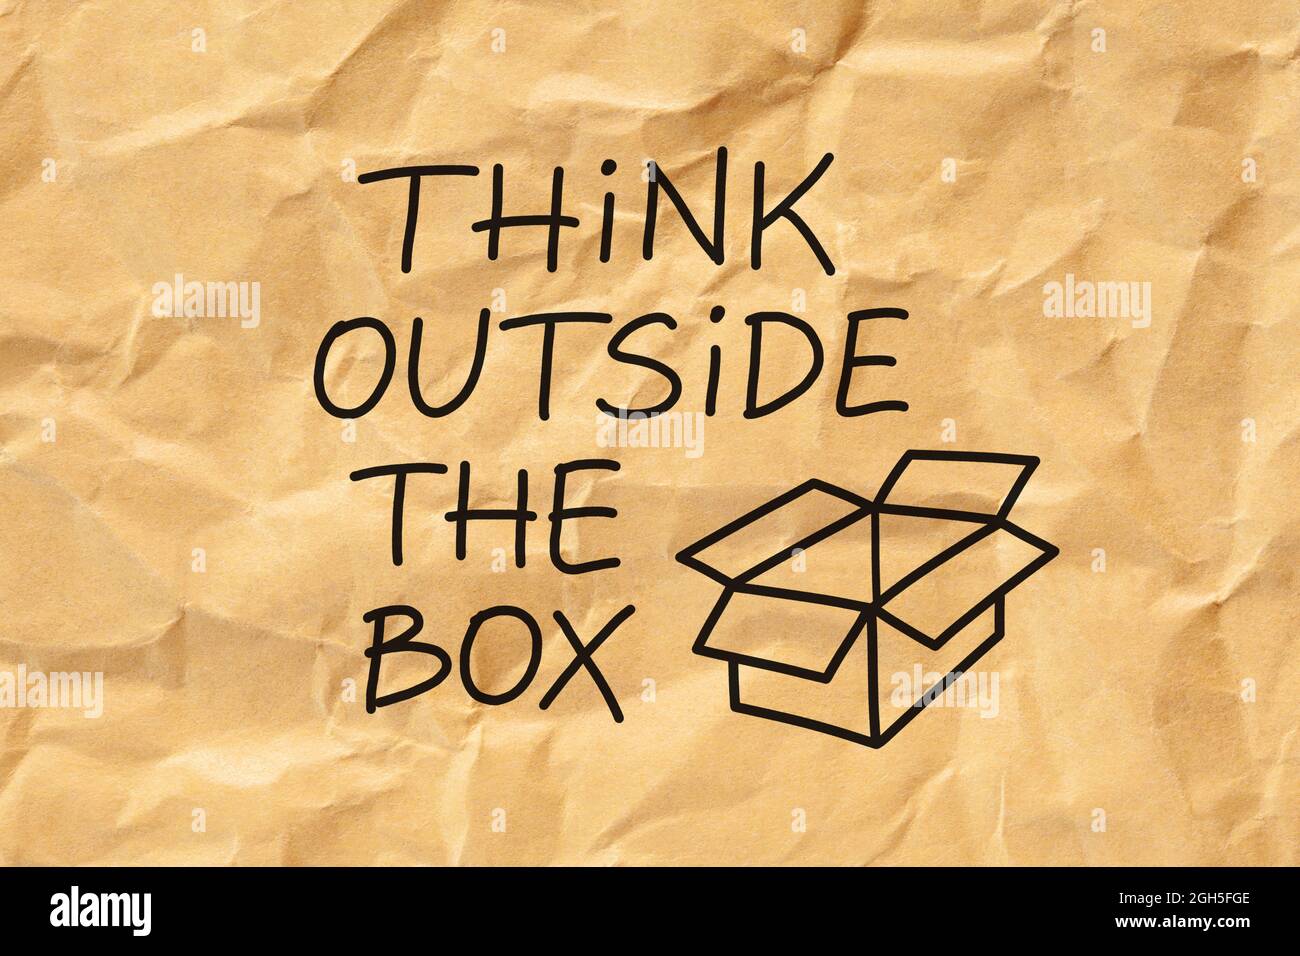 Text Think Outside The Box handwritten on crumpled brown paper. Creativity or innovation concept. Stock Photo